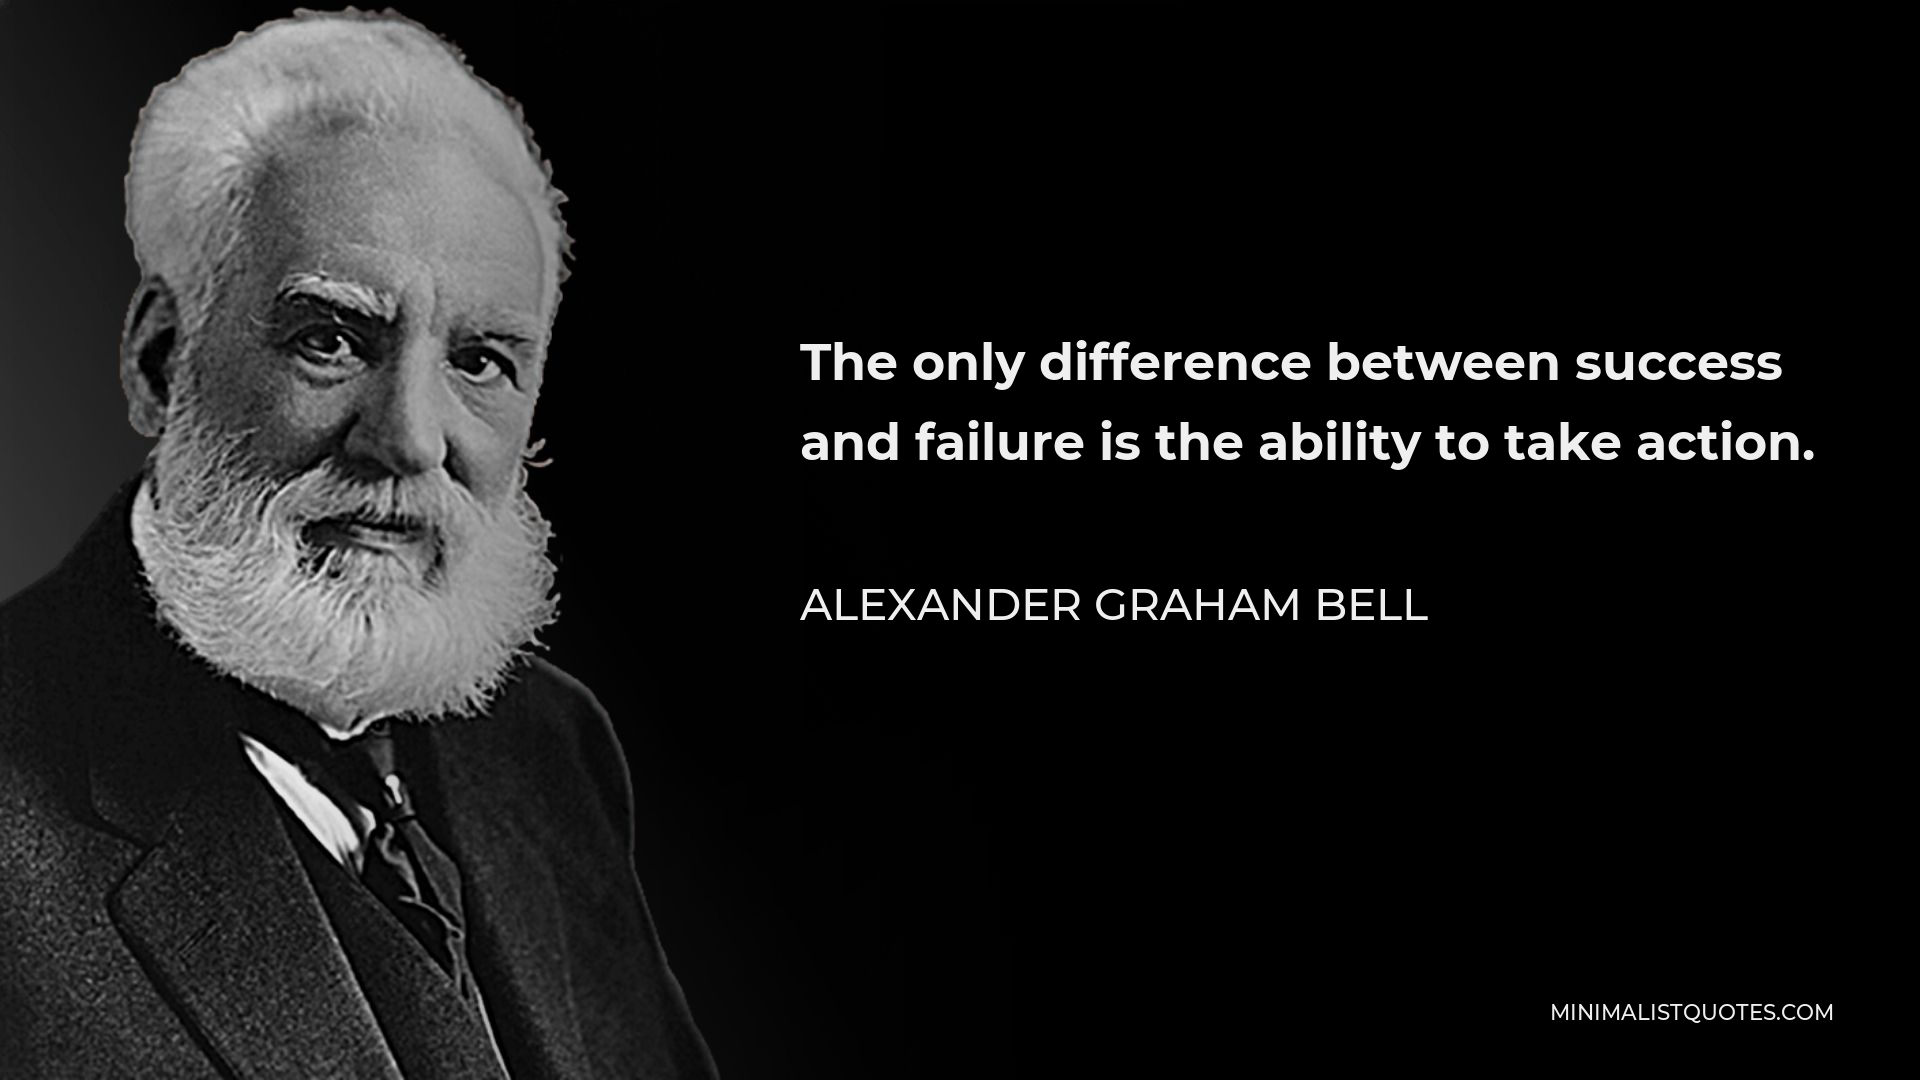 Alexander Graham Bell Quote: The only difference between success and ...